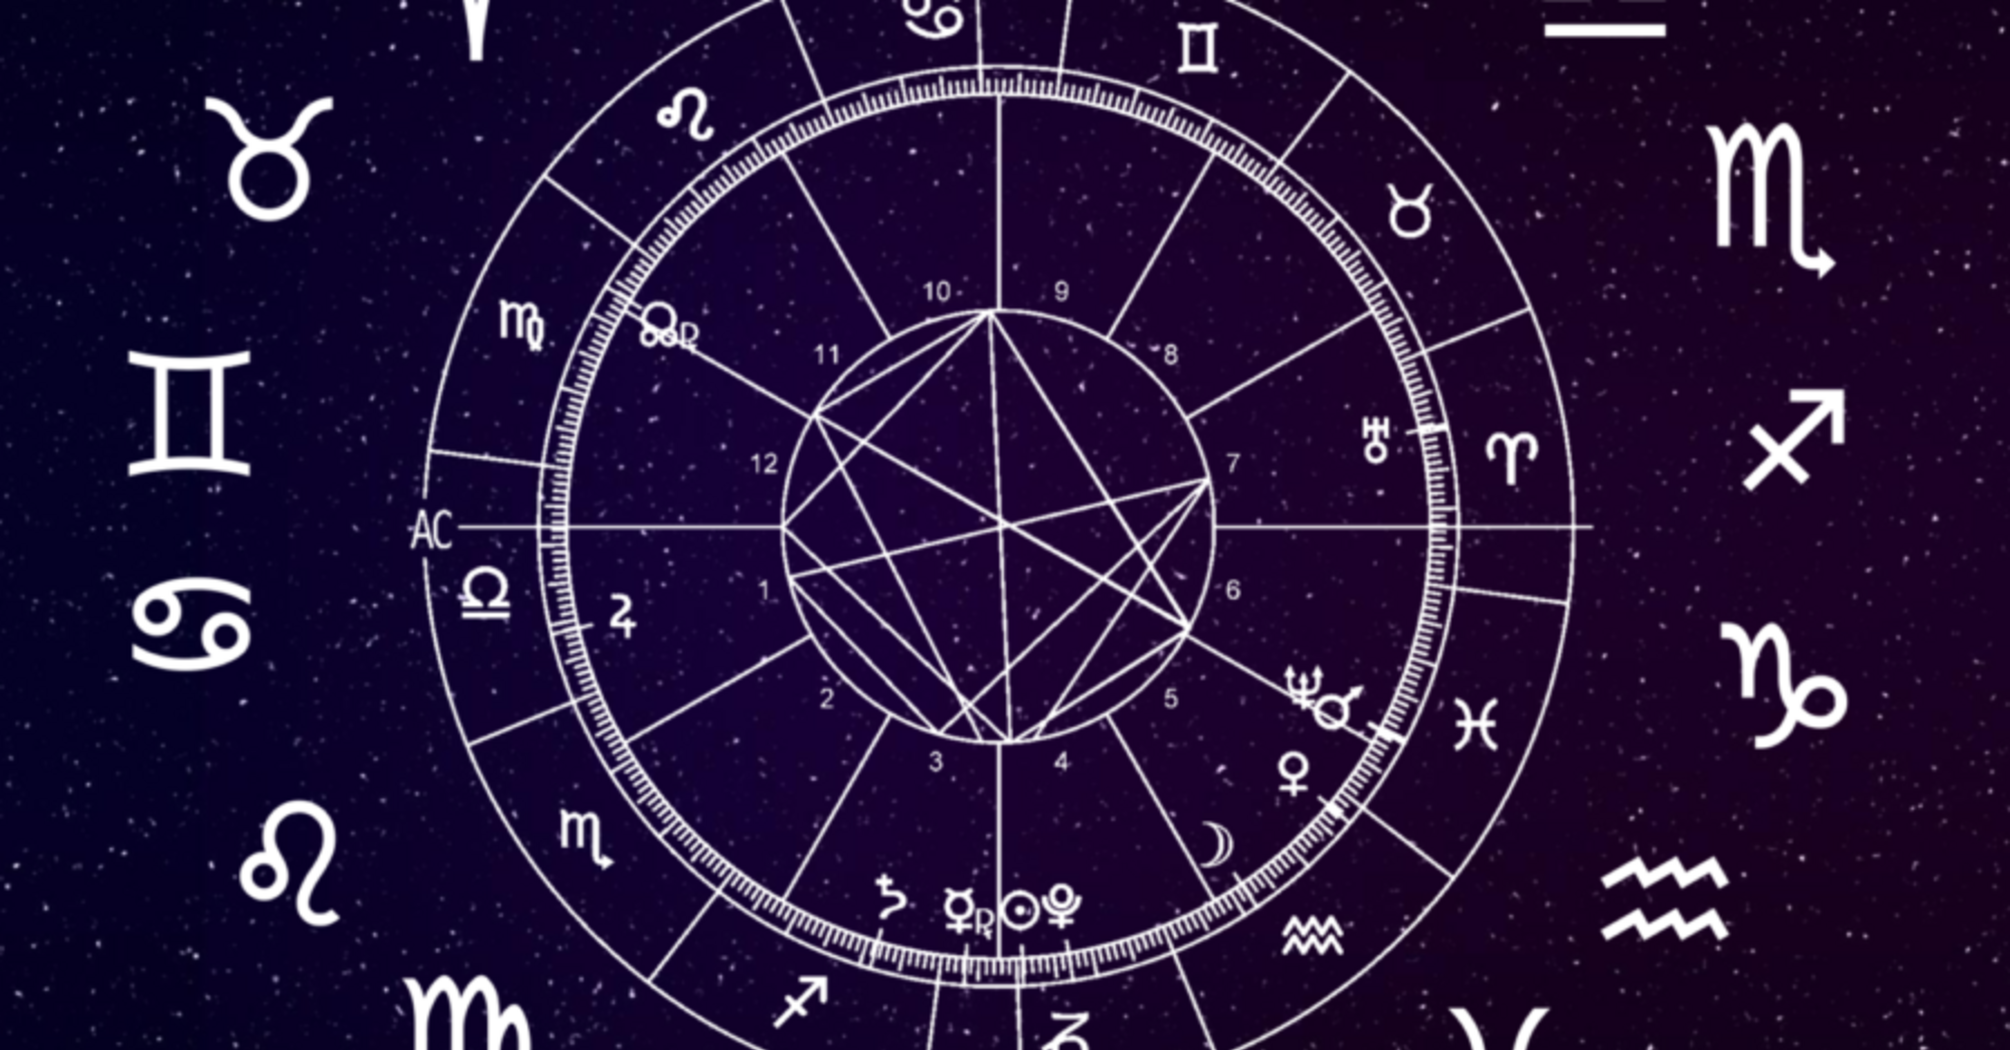 Opportunities to implement ideas are present: Horoscope for 12 zodiac signs